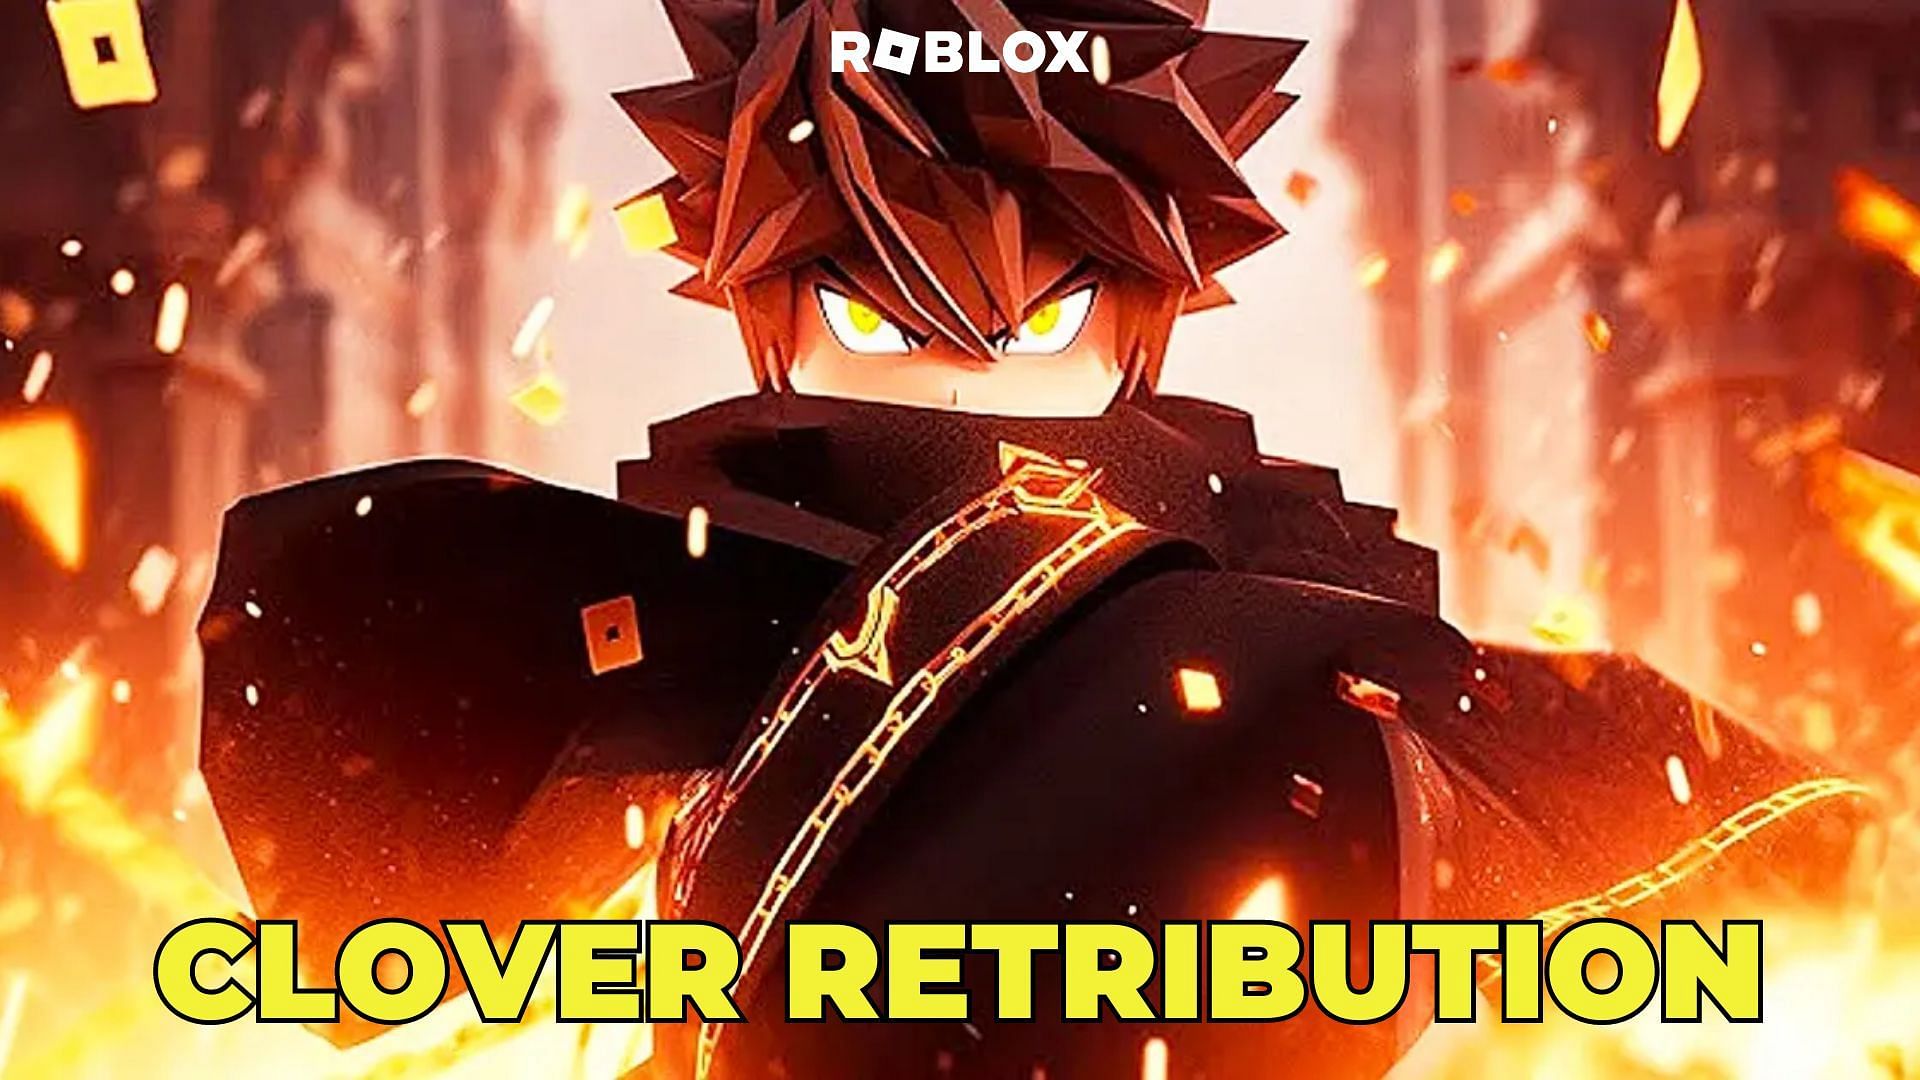 The complete guide for Clover Retribution. (Image via Roblox and Sportskeeda)